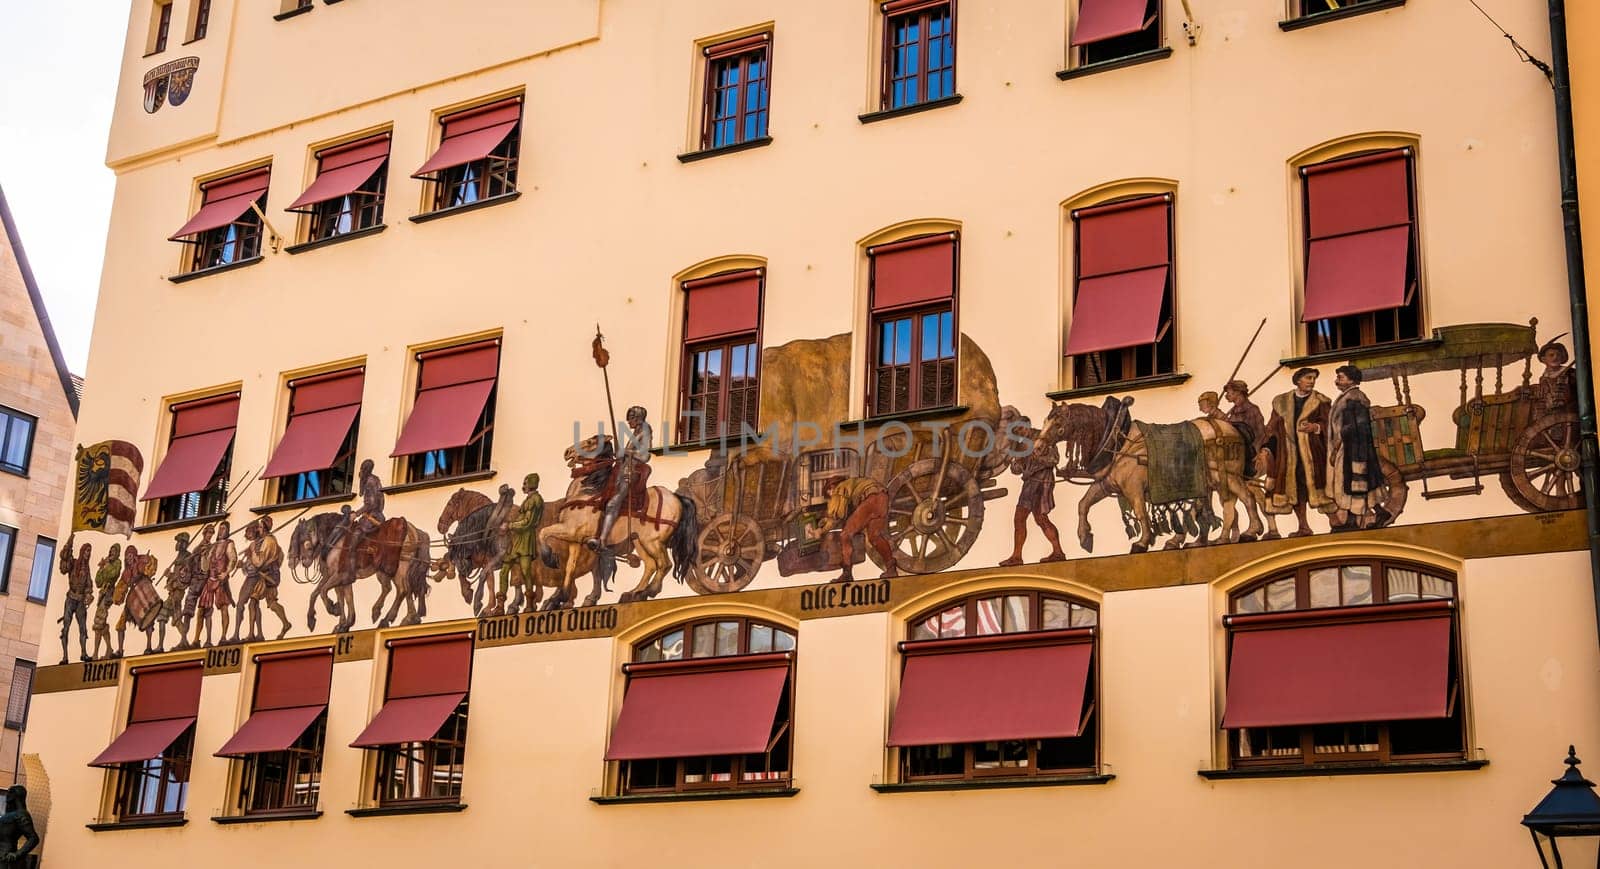 Nurnberg, Germany - 29 August 2022: Old building wall with traditional historical paintings in Nuremberg, Germany. Beautiful house drawings with horses in famous Bavaria region, Europe